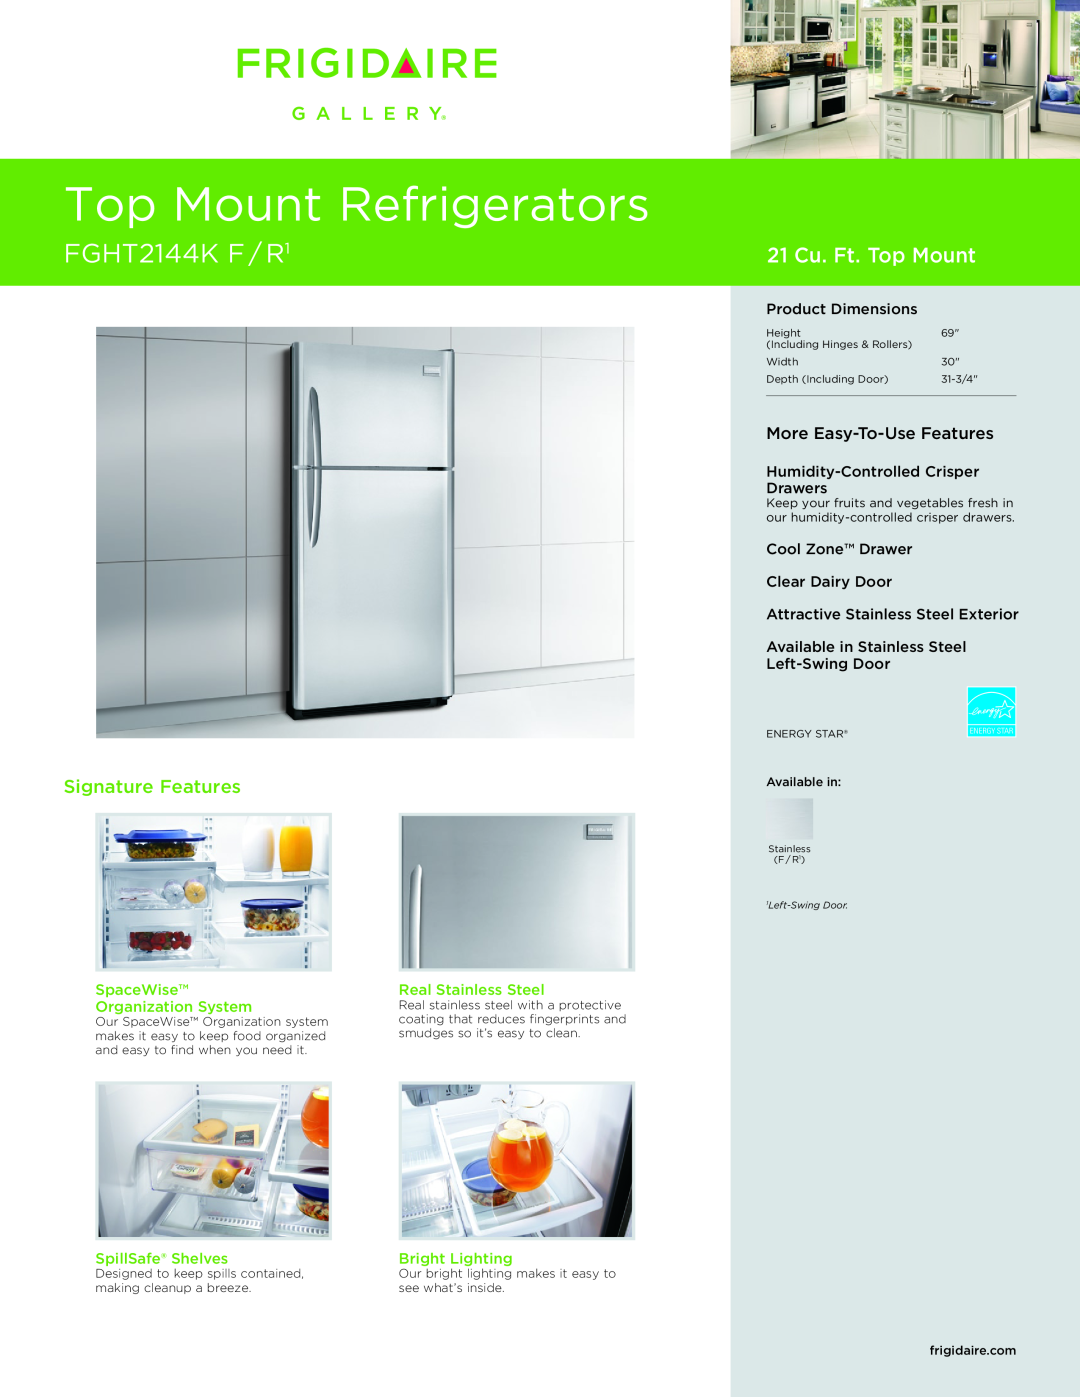 Frigidaire FGHT2144K F/R1 dimensions Top Mount Refrigerators, FGHT2144K F / R1, 21 Cu. Ft. Top Mount, Signature Features 